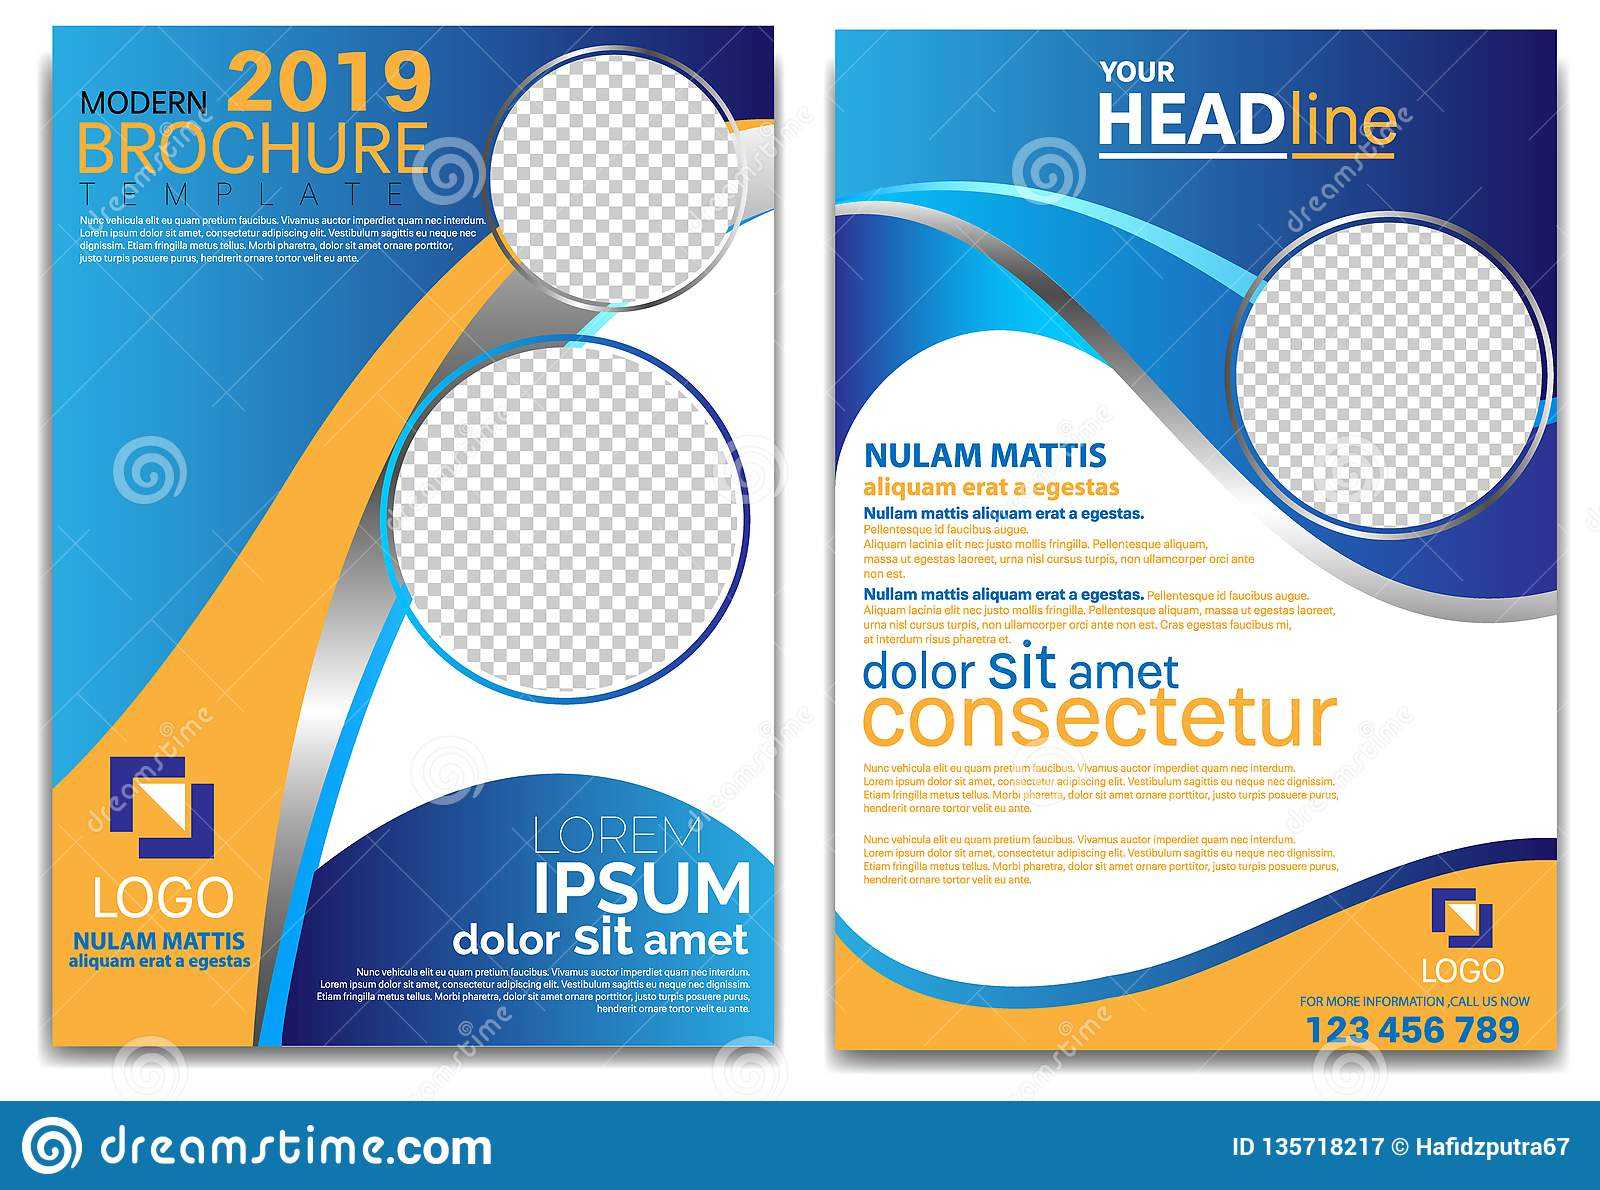 Modern Brochure Template 2019 And Professional Brochure With Professional Brochure Design Templates